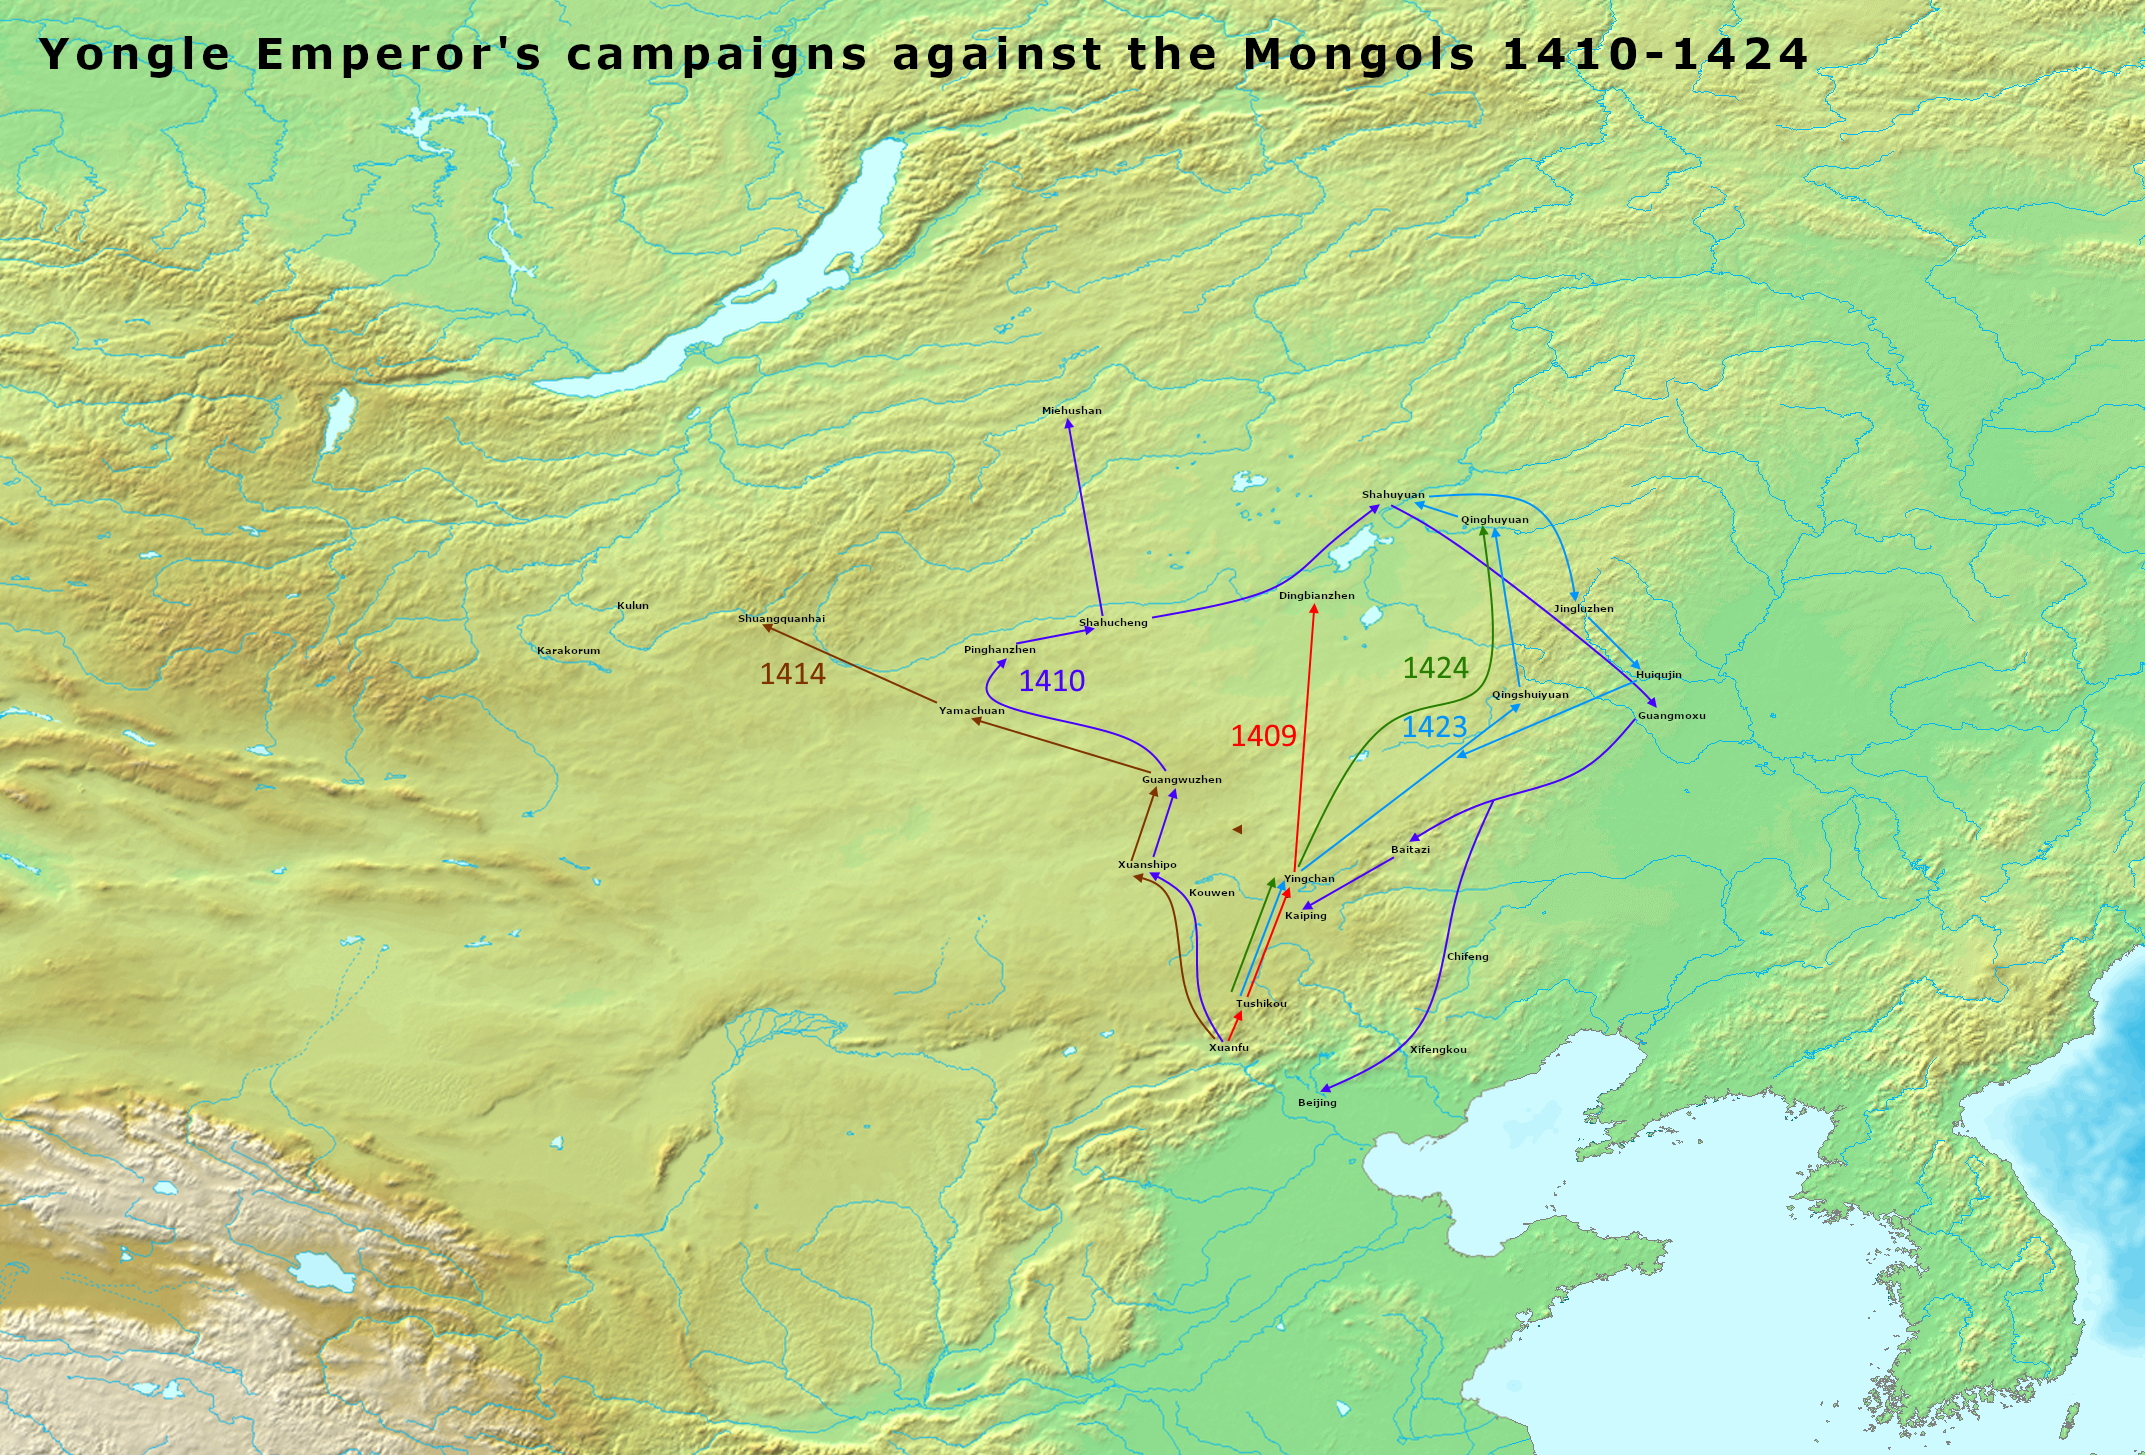 Yongle Emperor's campaigns against the Mongols